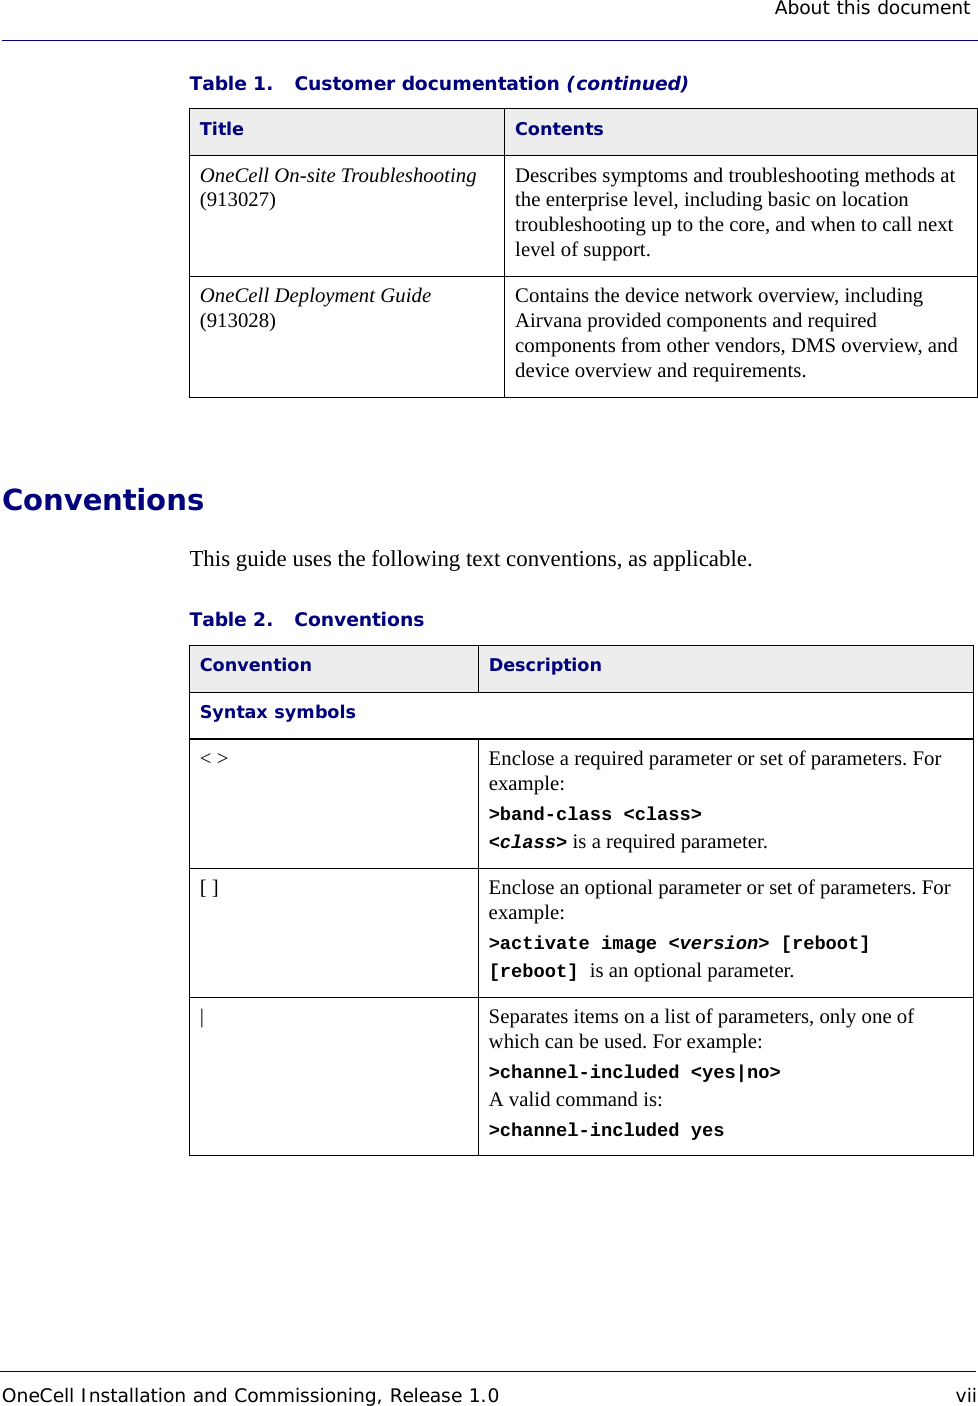 About this document OneCell Installation and Commissioning, Release 1.0 viiDRAFTConventionsThis guide uses the following text conventions, as applicable.OneCell On-site Troubleshooting (913027) Describes symptoms and troubleshooting methods at the enterprise level, including basic on location troubleshooting up to the core, and when to call next level of support.OneCell Deployment Guide (913028) Contains the device network overview, including Airvana provided components and required components from other vendors, DMS overview, and device overview and requirements. Table 1. Customer documentation (continued)Title ContentsTable 2. ConventionsConvention DescriptionSyntax symbols&lt; &gt; Enclose a required parameter or set of parameters. For example:&gt;band-class &lt;class&gt;&lt;class&gt; is a required parameter.[ ] Enclose an optional parameter or set of parameters. For example:&gt;activate image &lt;version&gt; [reboot][reboot] is an optional parameter. | Separates items on a list of parameters, only one of which can be used. For example:&gt;channel-included &lt;yes|no&gt;A valid command is:&gt;channel-included yes